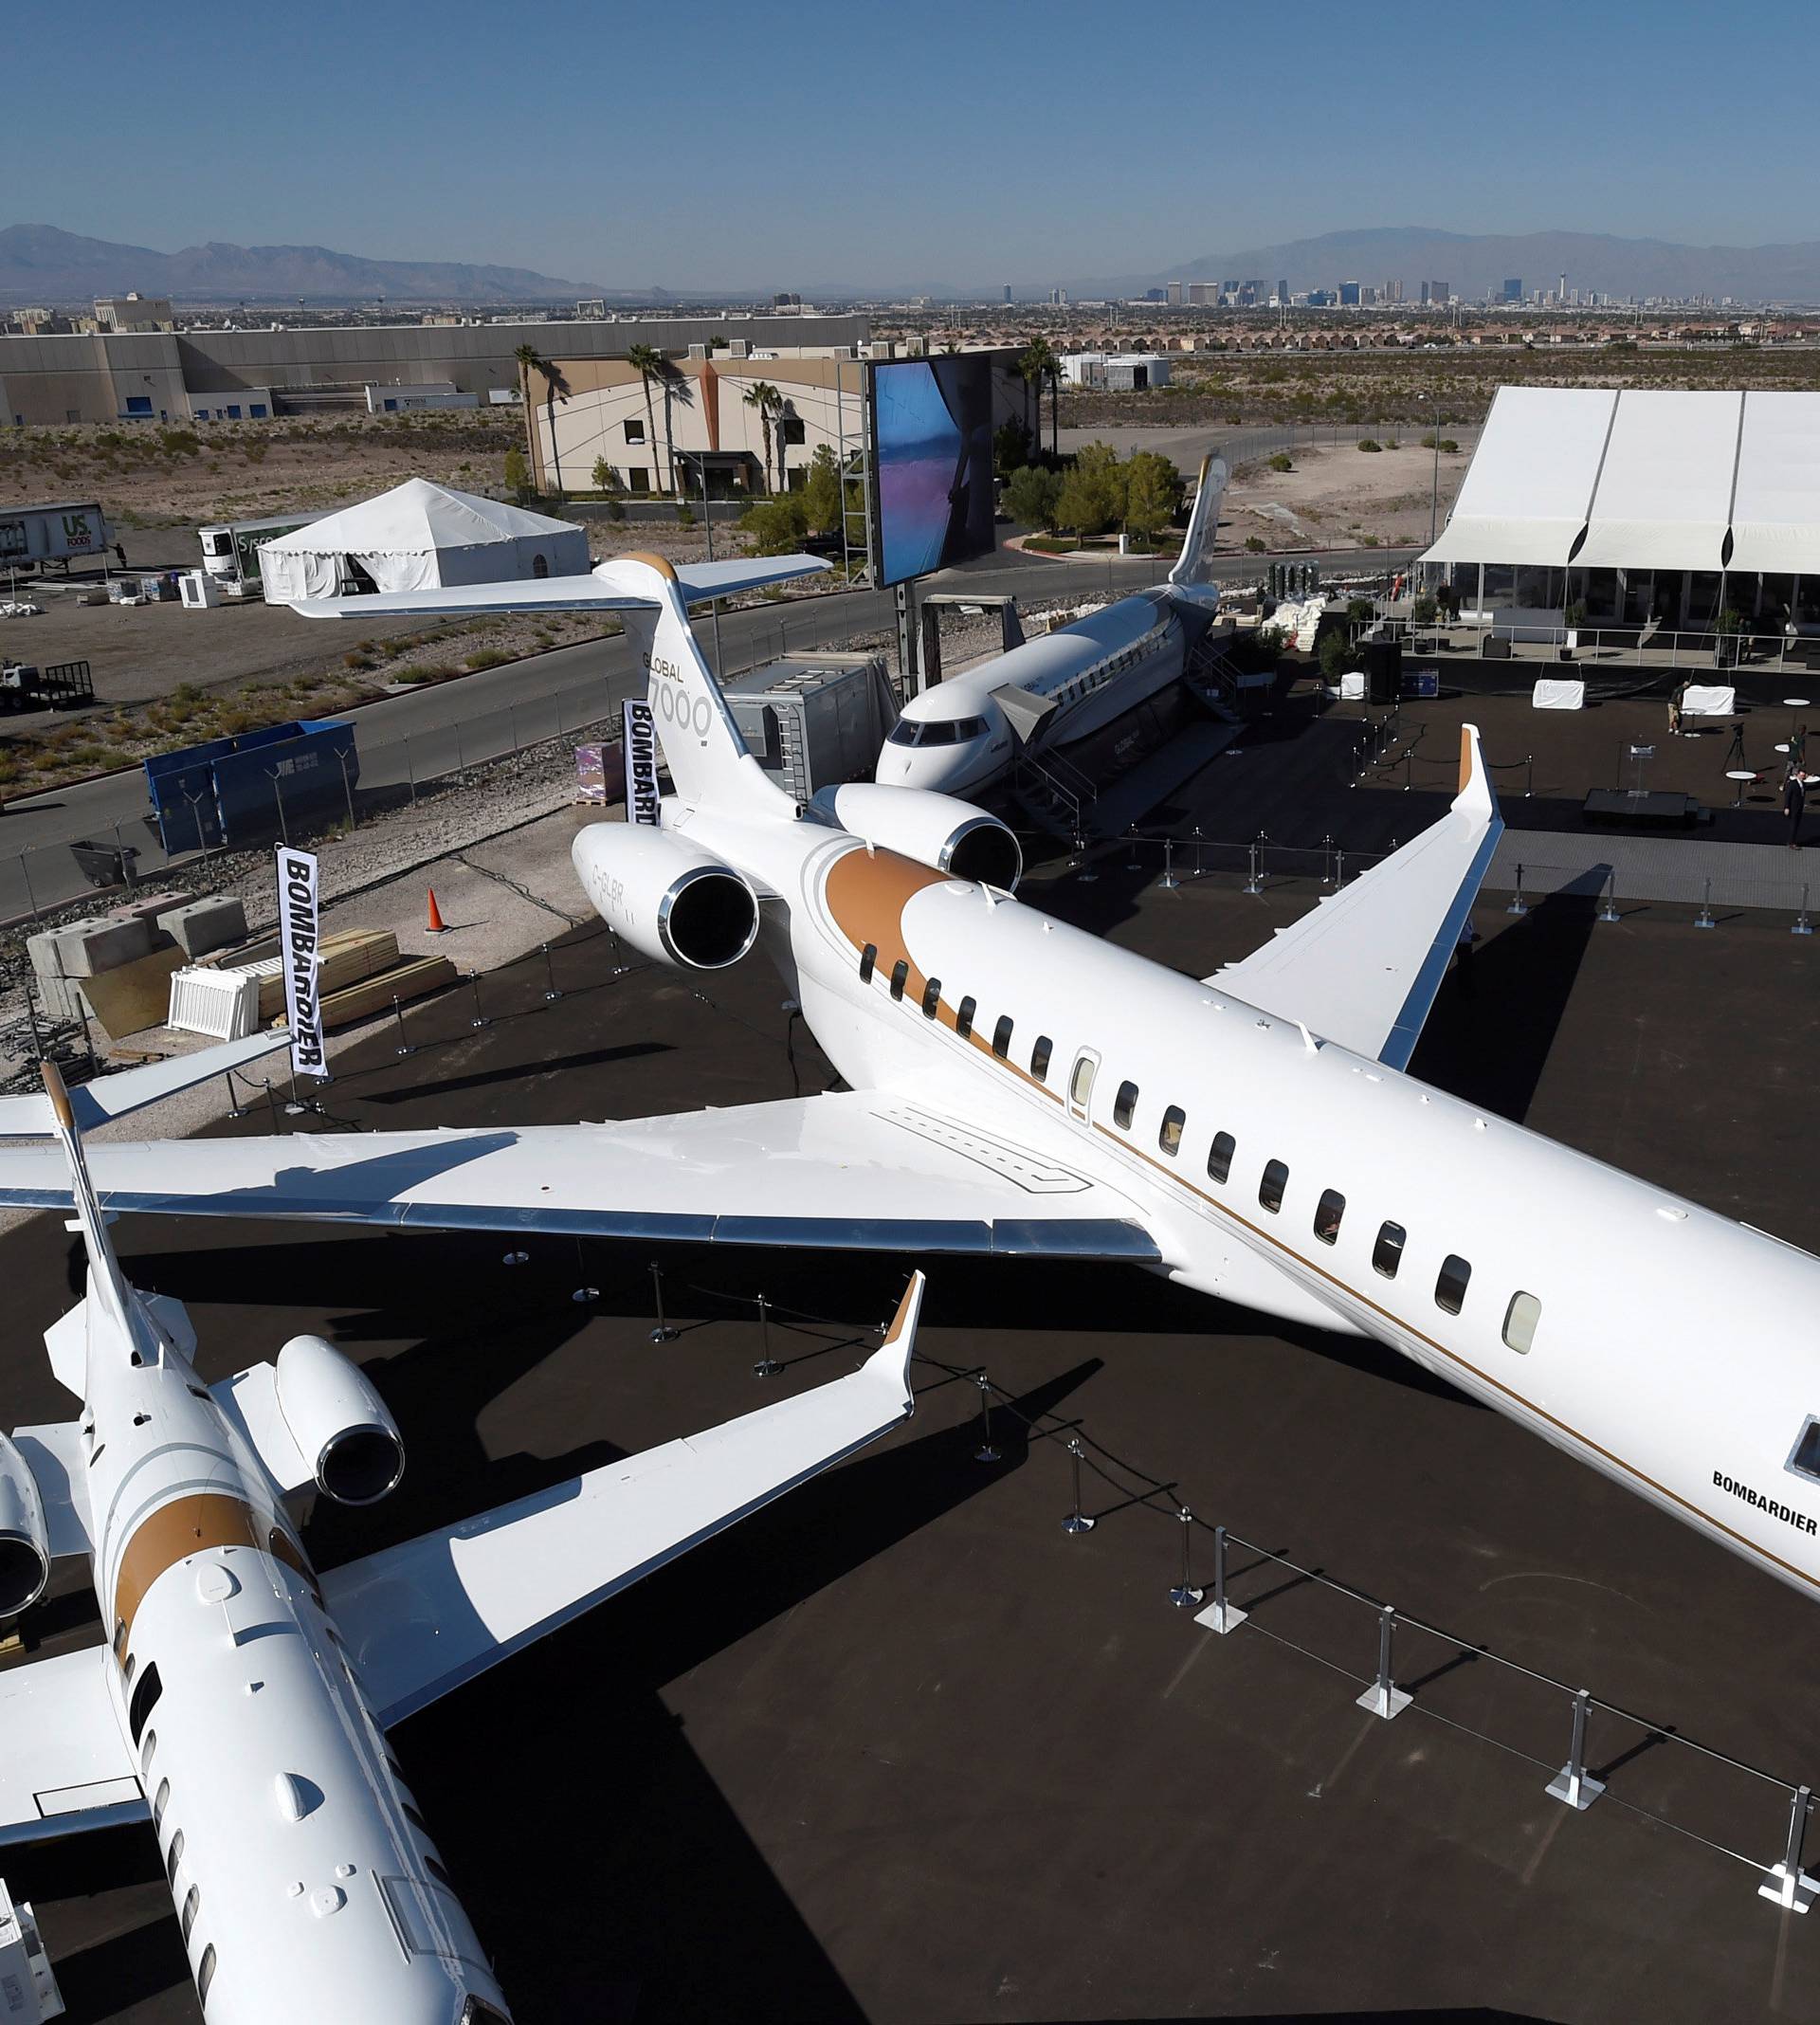 An aerial view of Bombardier's new Global 7000 business jet is seen during the National Business Aviation Association at the Henderson Executive Airport in Henderson